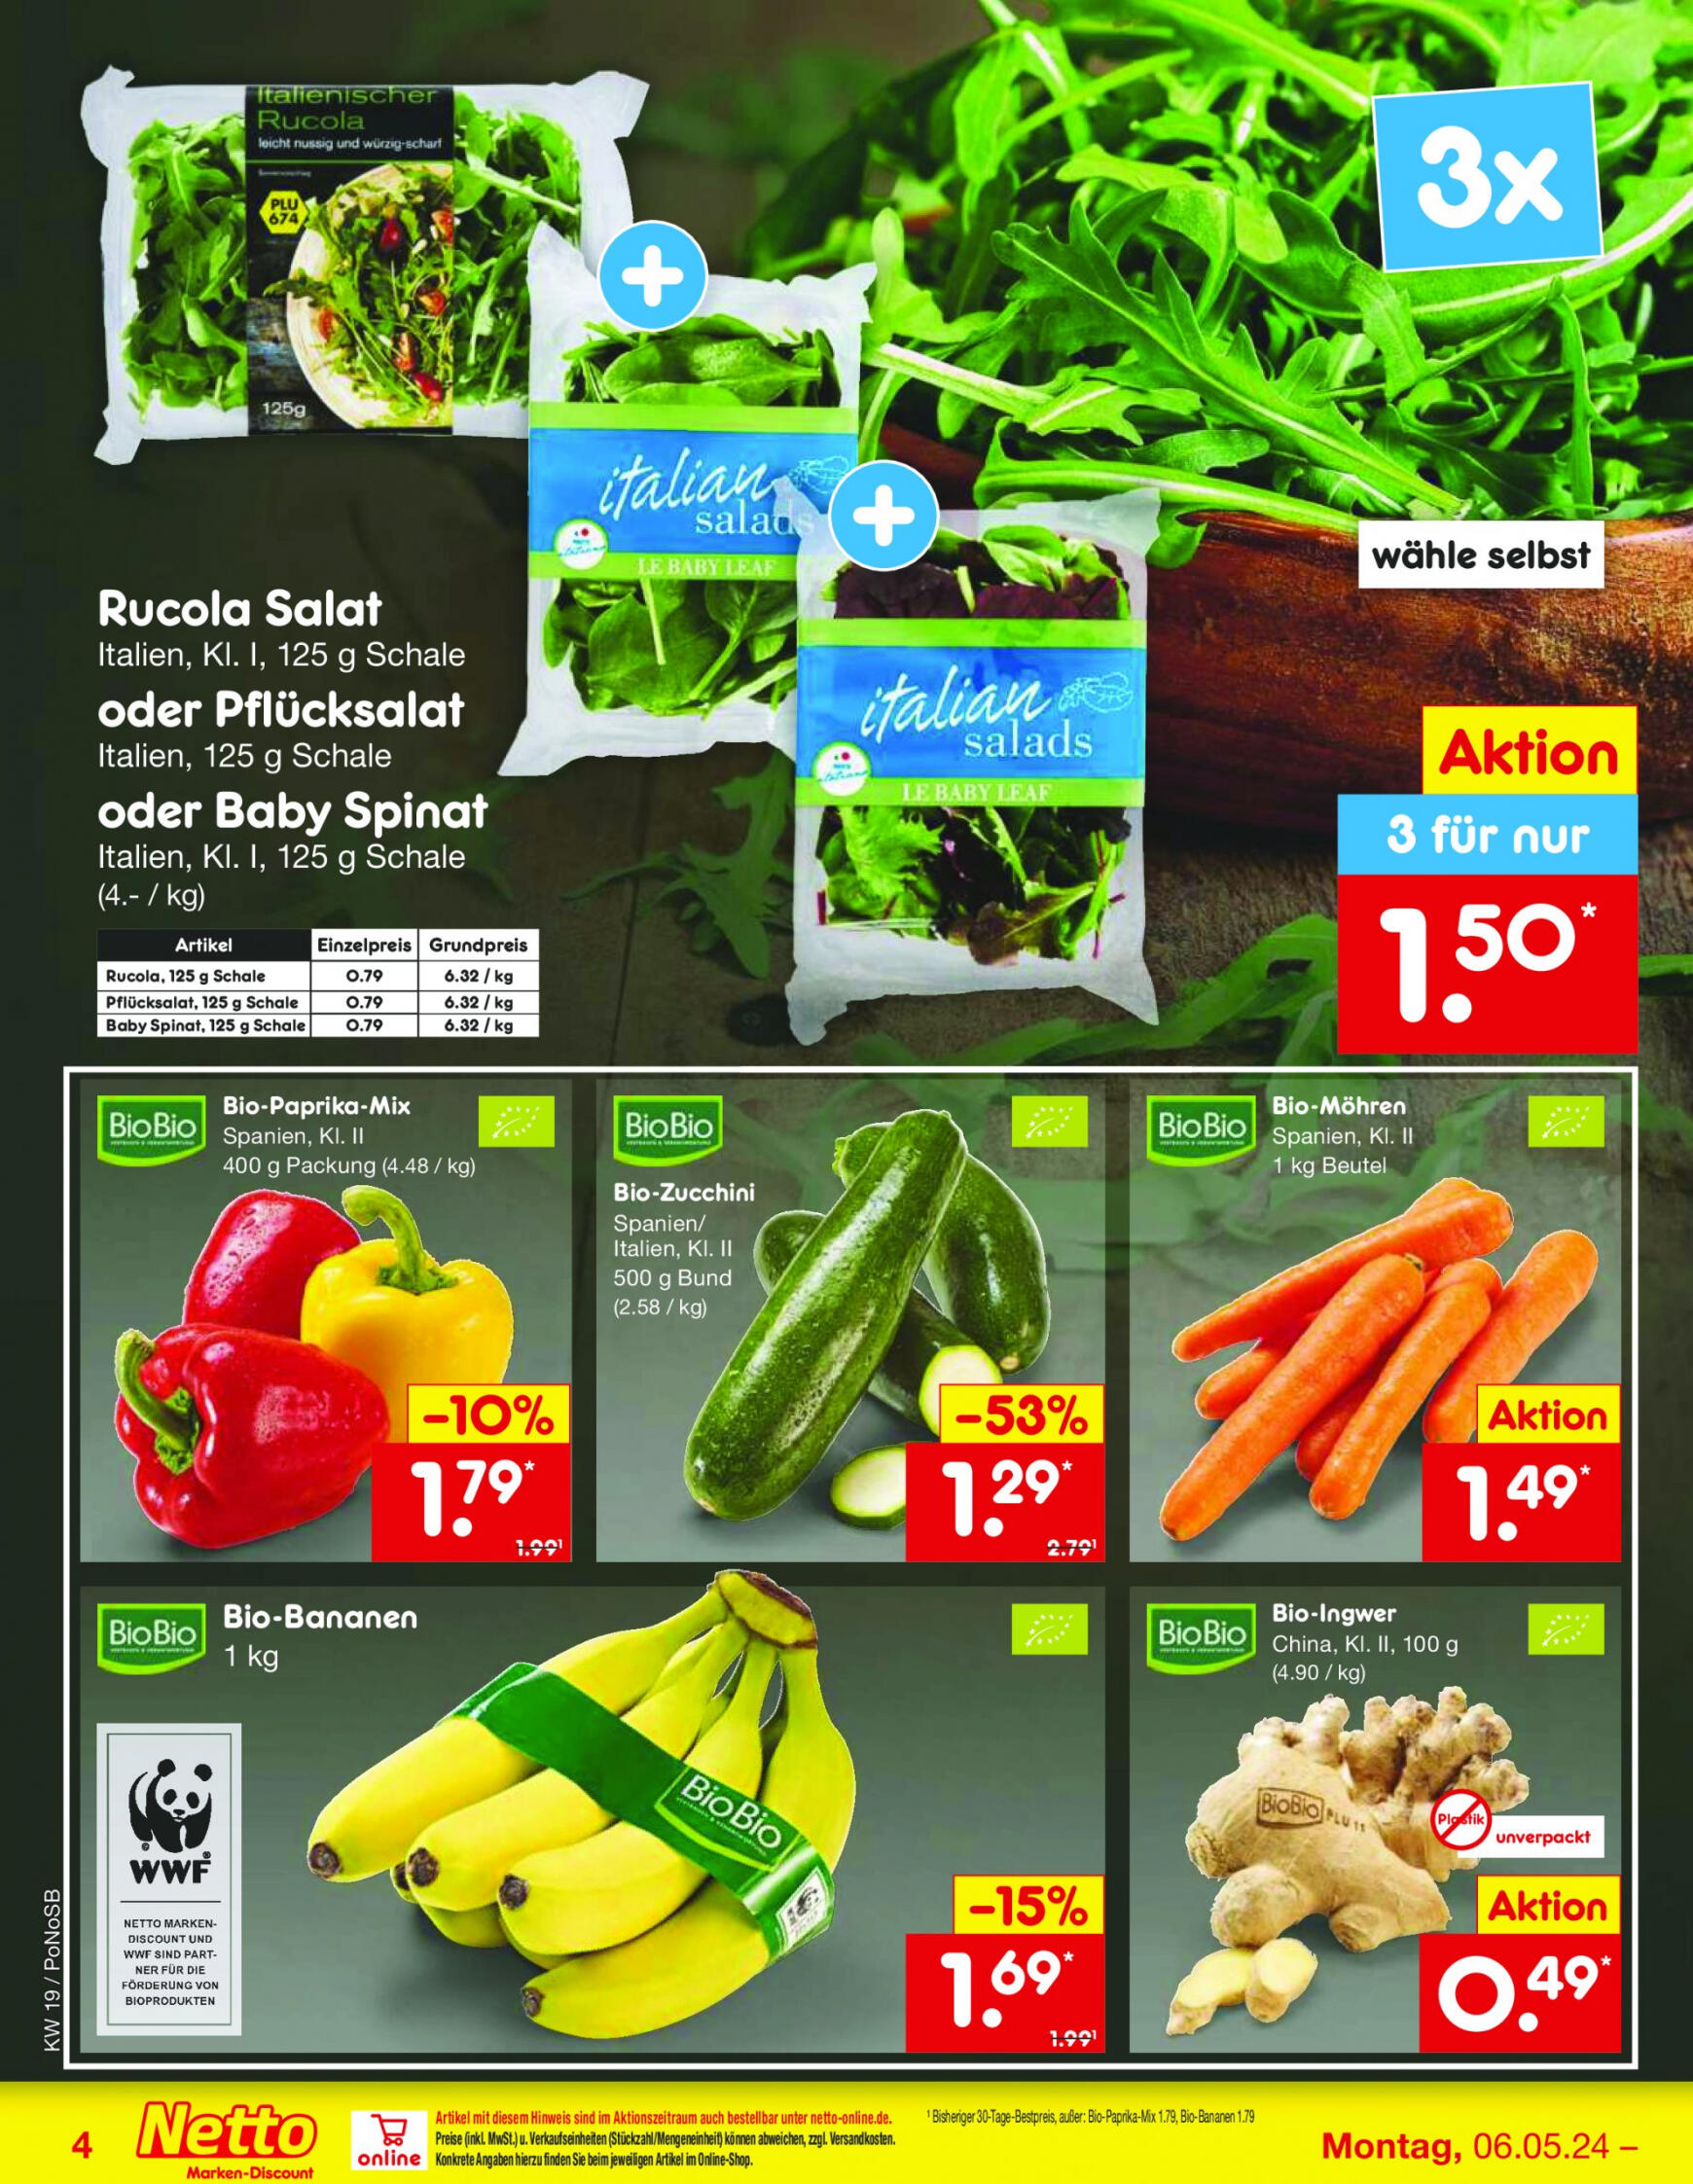 netto - Flyer Netto aktuell 06.05. - 11.05. - page: 4